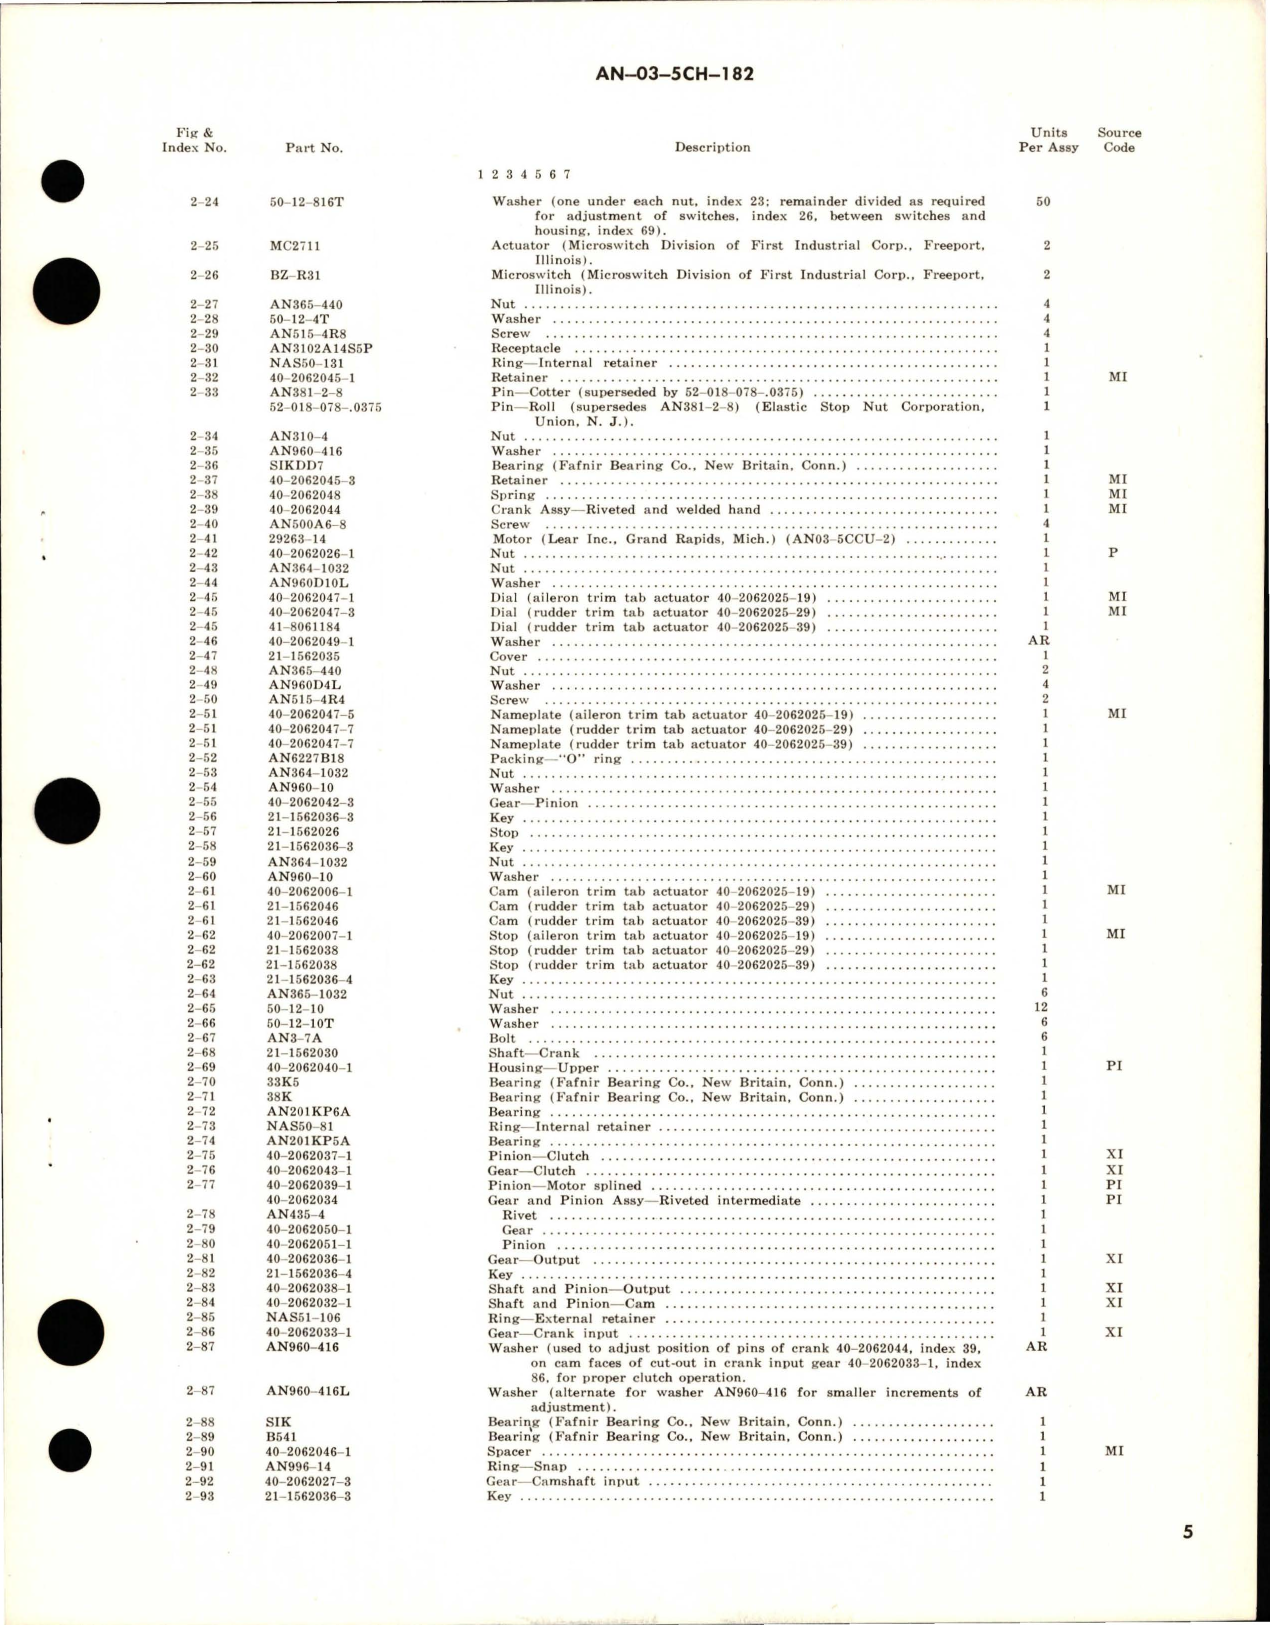 Sample page 5 from AirCorps Library document: Overhaul Instructions with Parts Breakdown for Trim Tab Actuator - 40-2062025-19 and 40-2062025-29